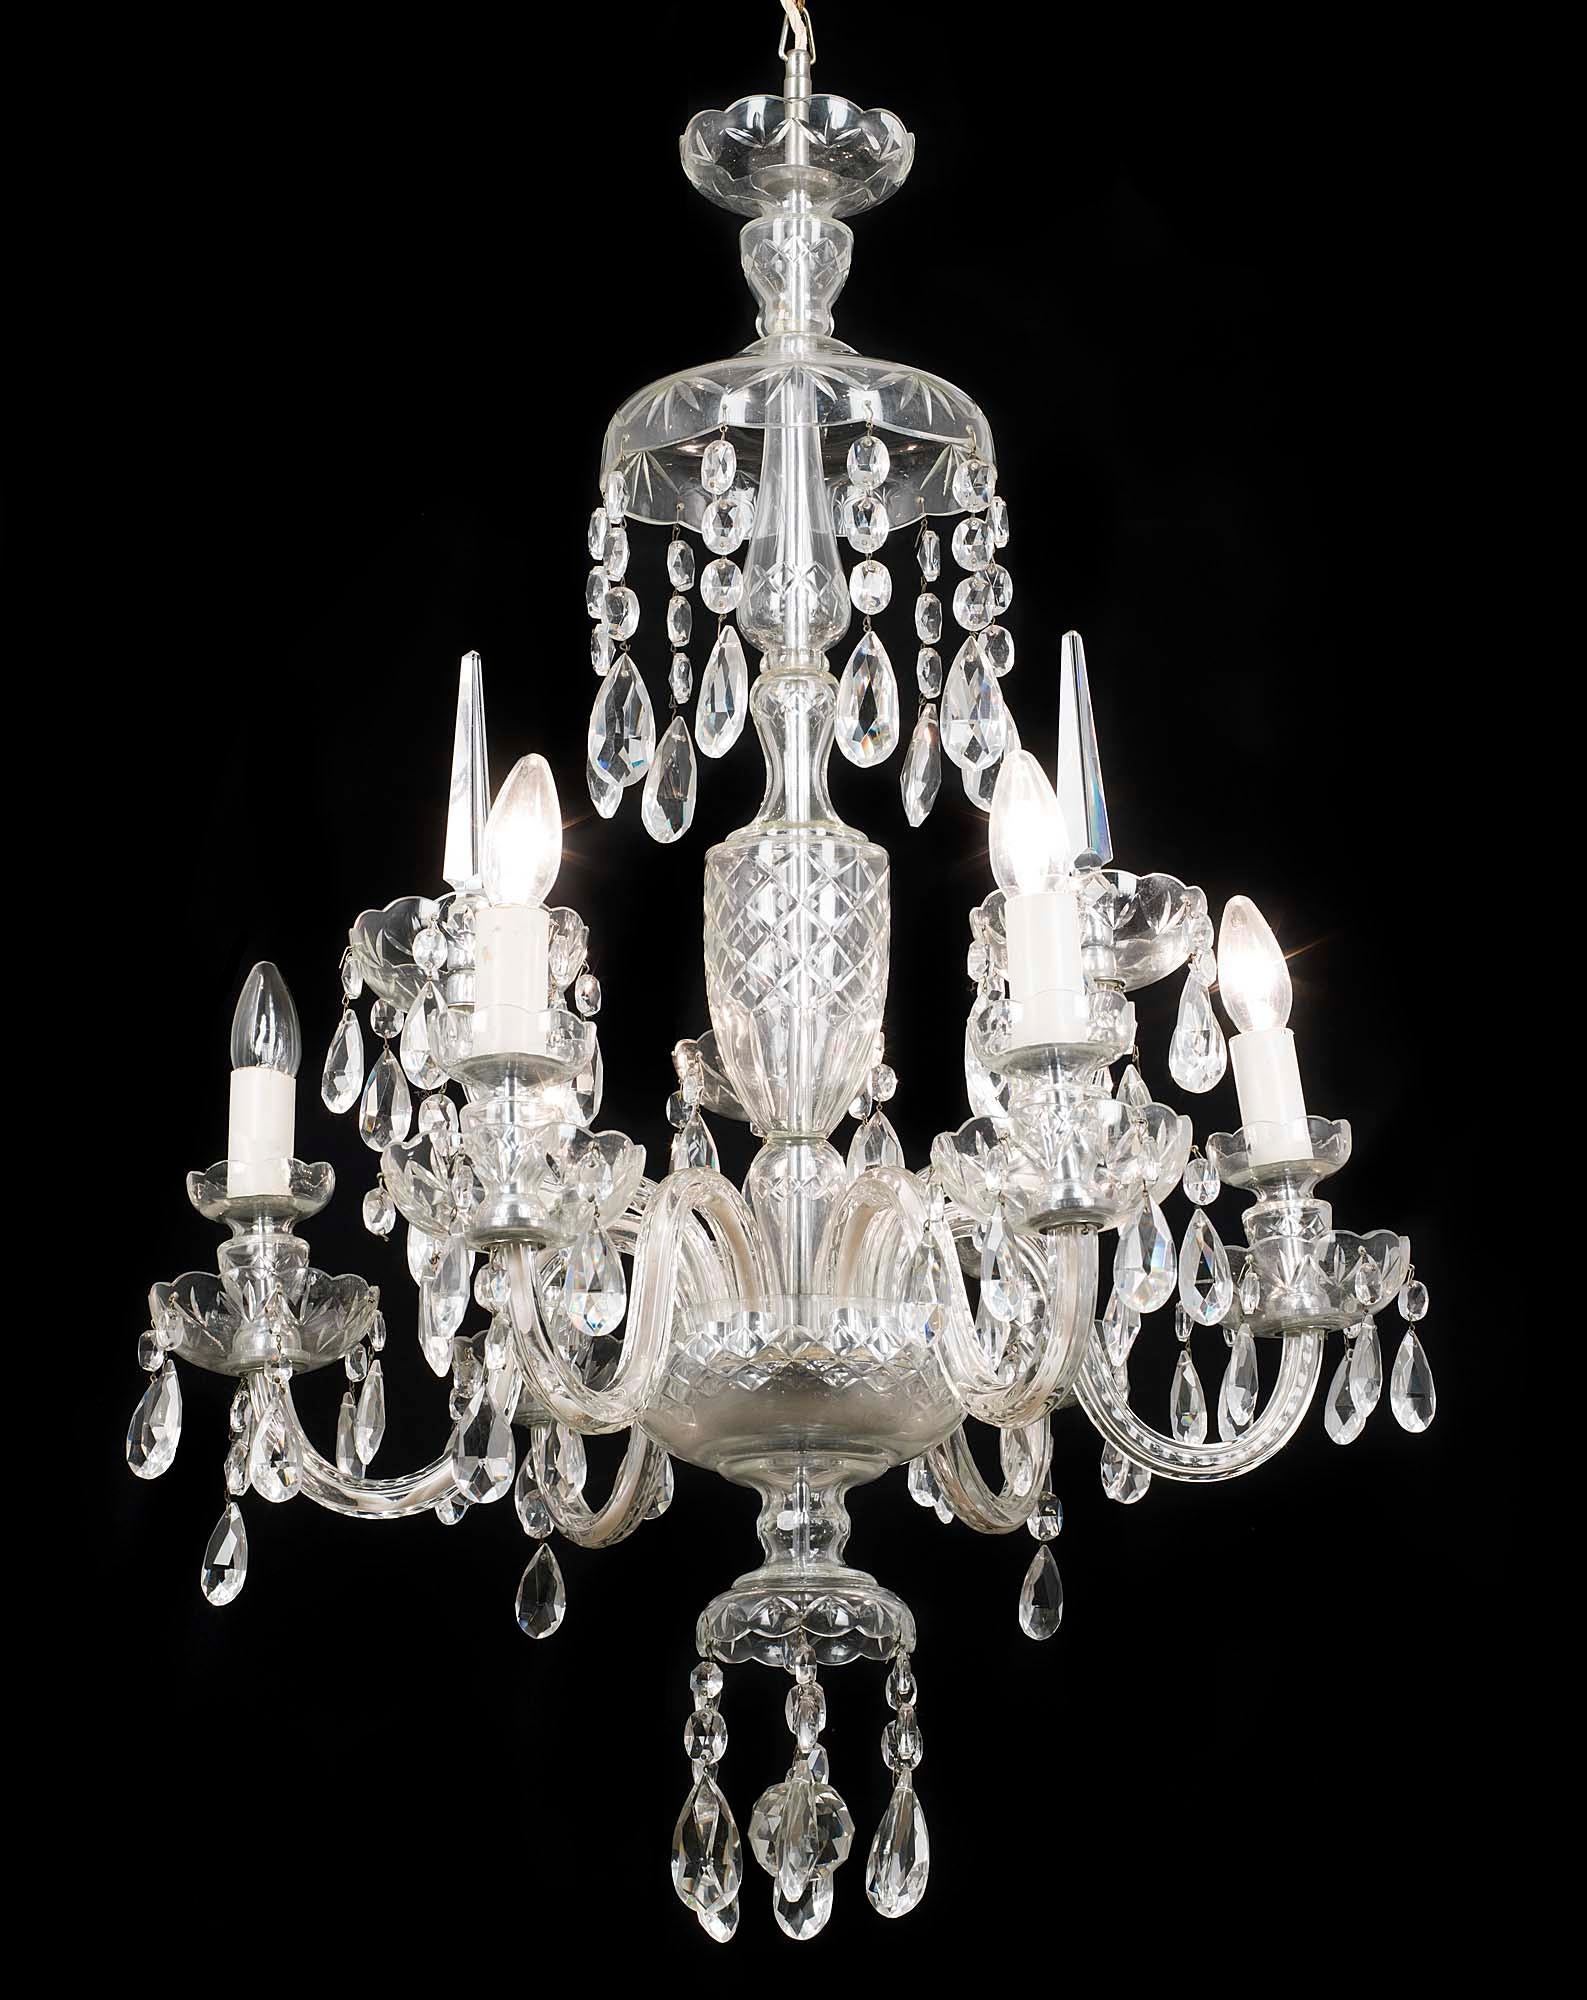 A 20th century Regency style cut-glass nine branch chandelier. The shaped glass stem issuing nine arms over two graduated tiers and hung with cut-glass drops.
English, mid-20th century.
 